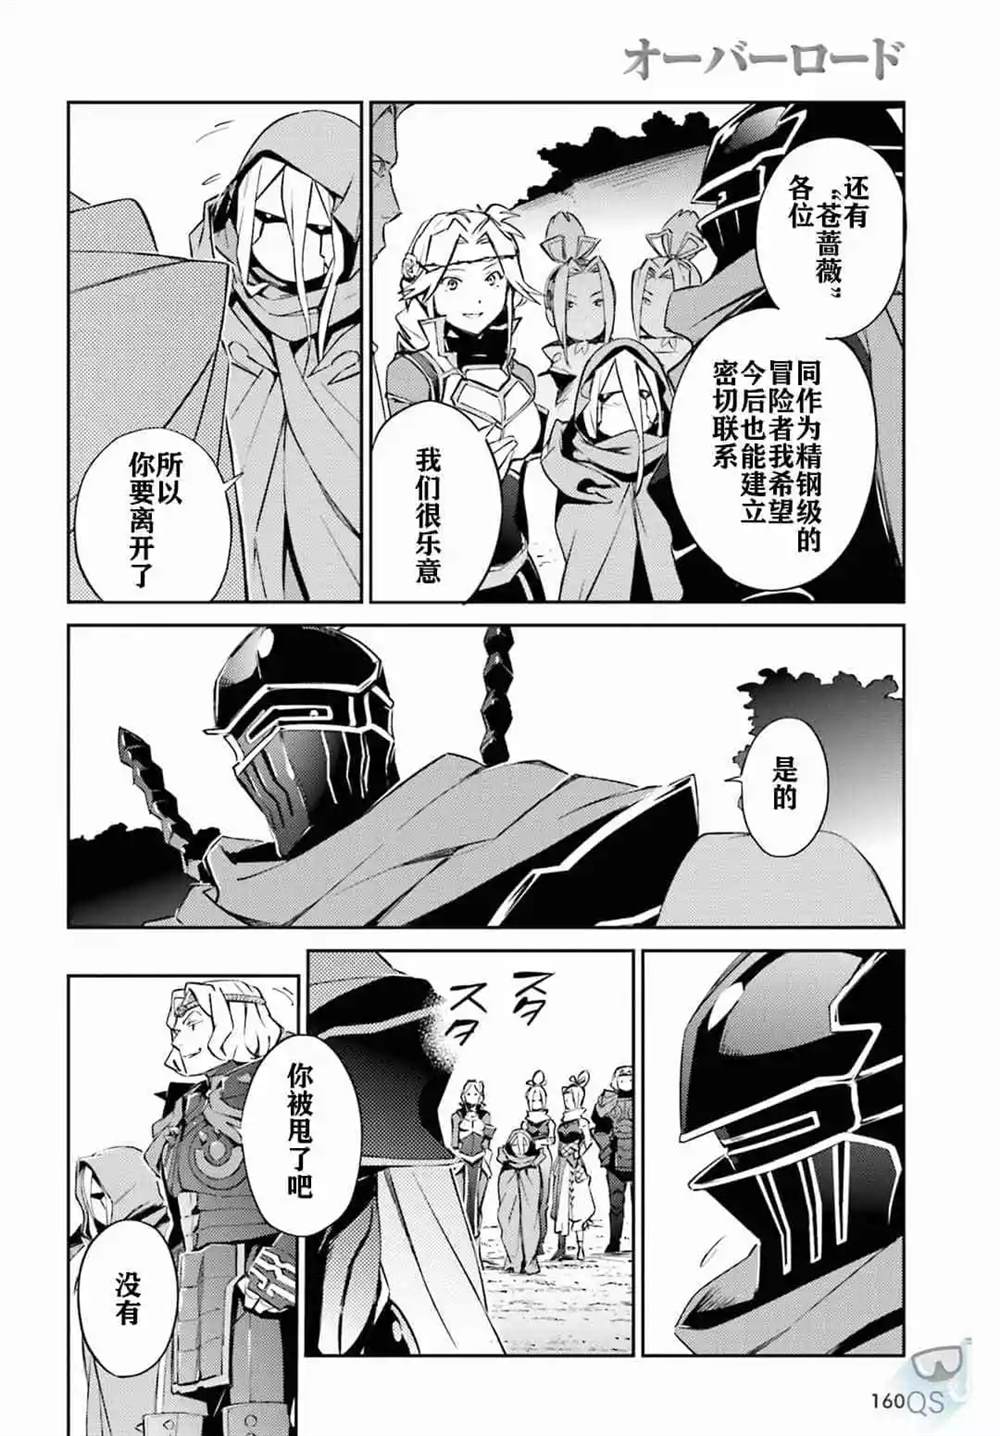 OVERLORD - 第52話 - 6